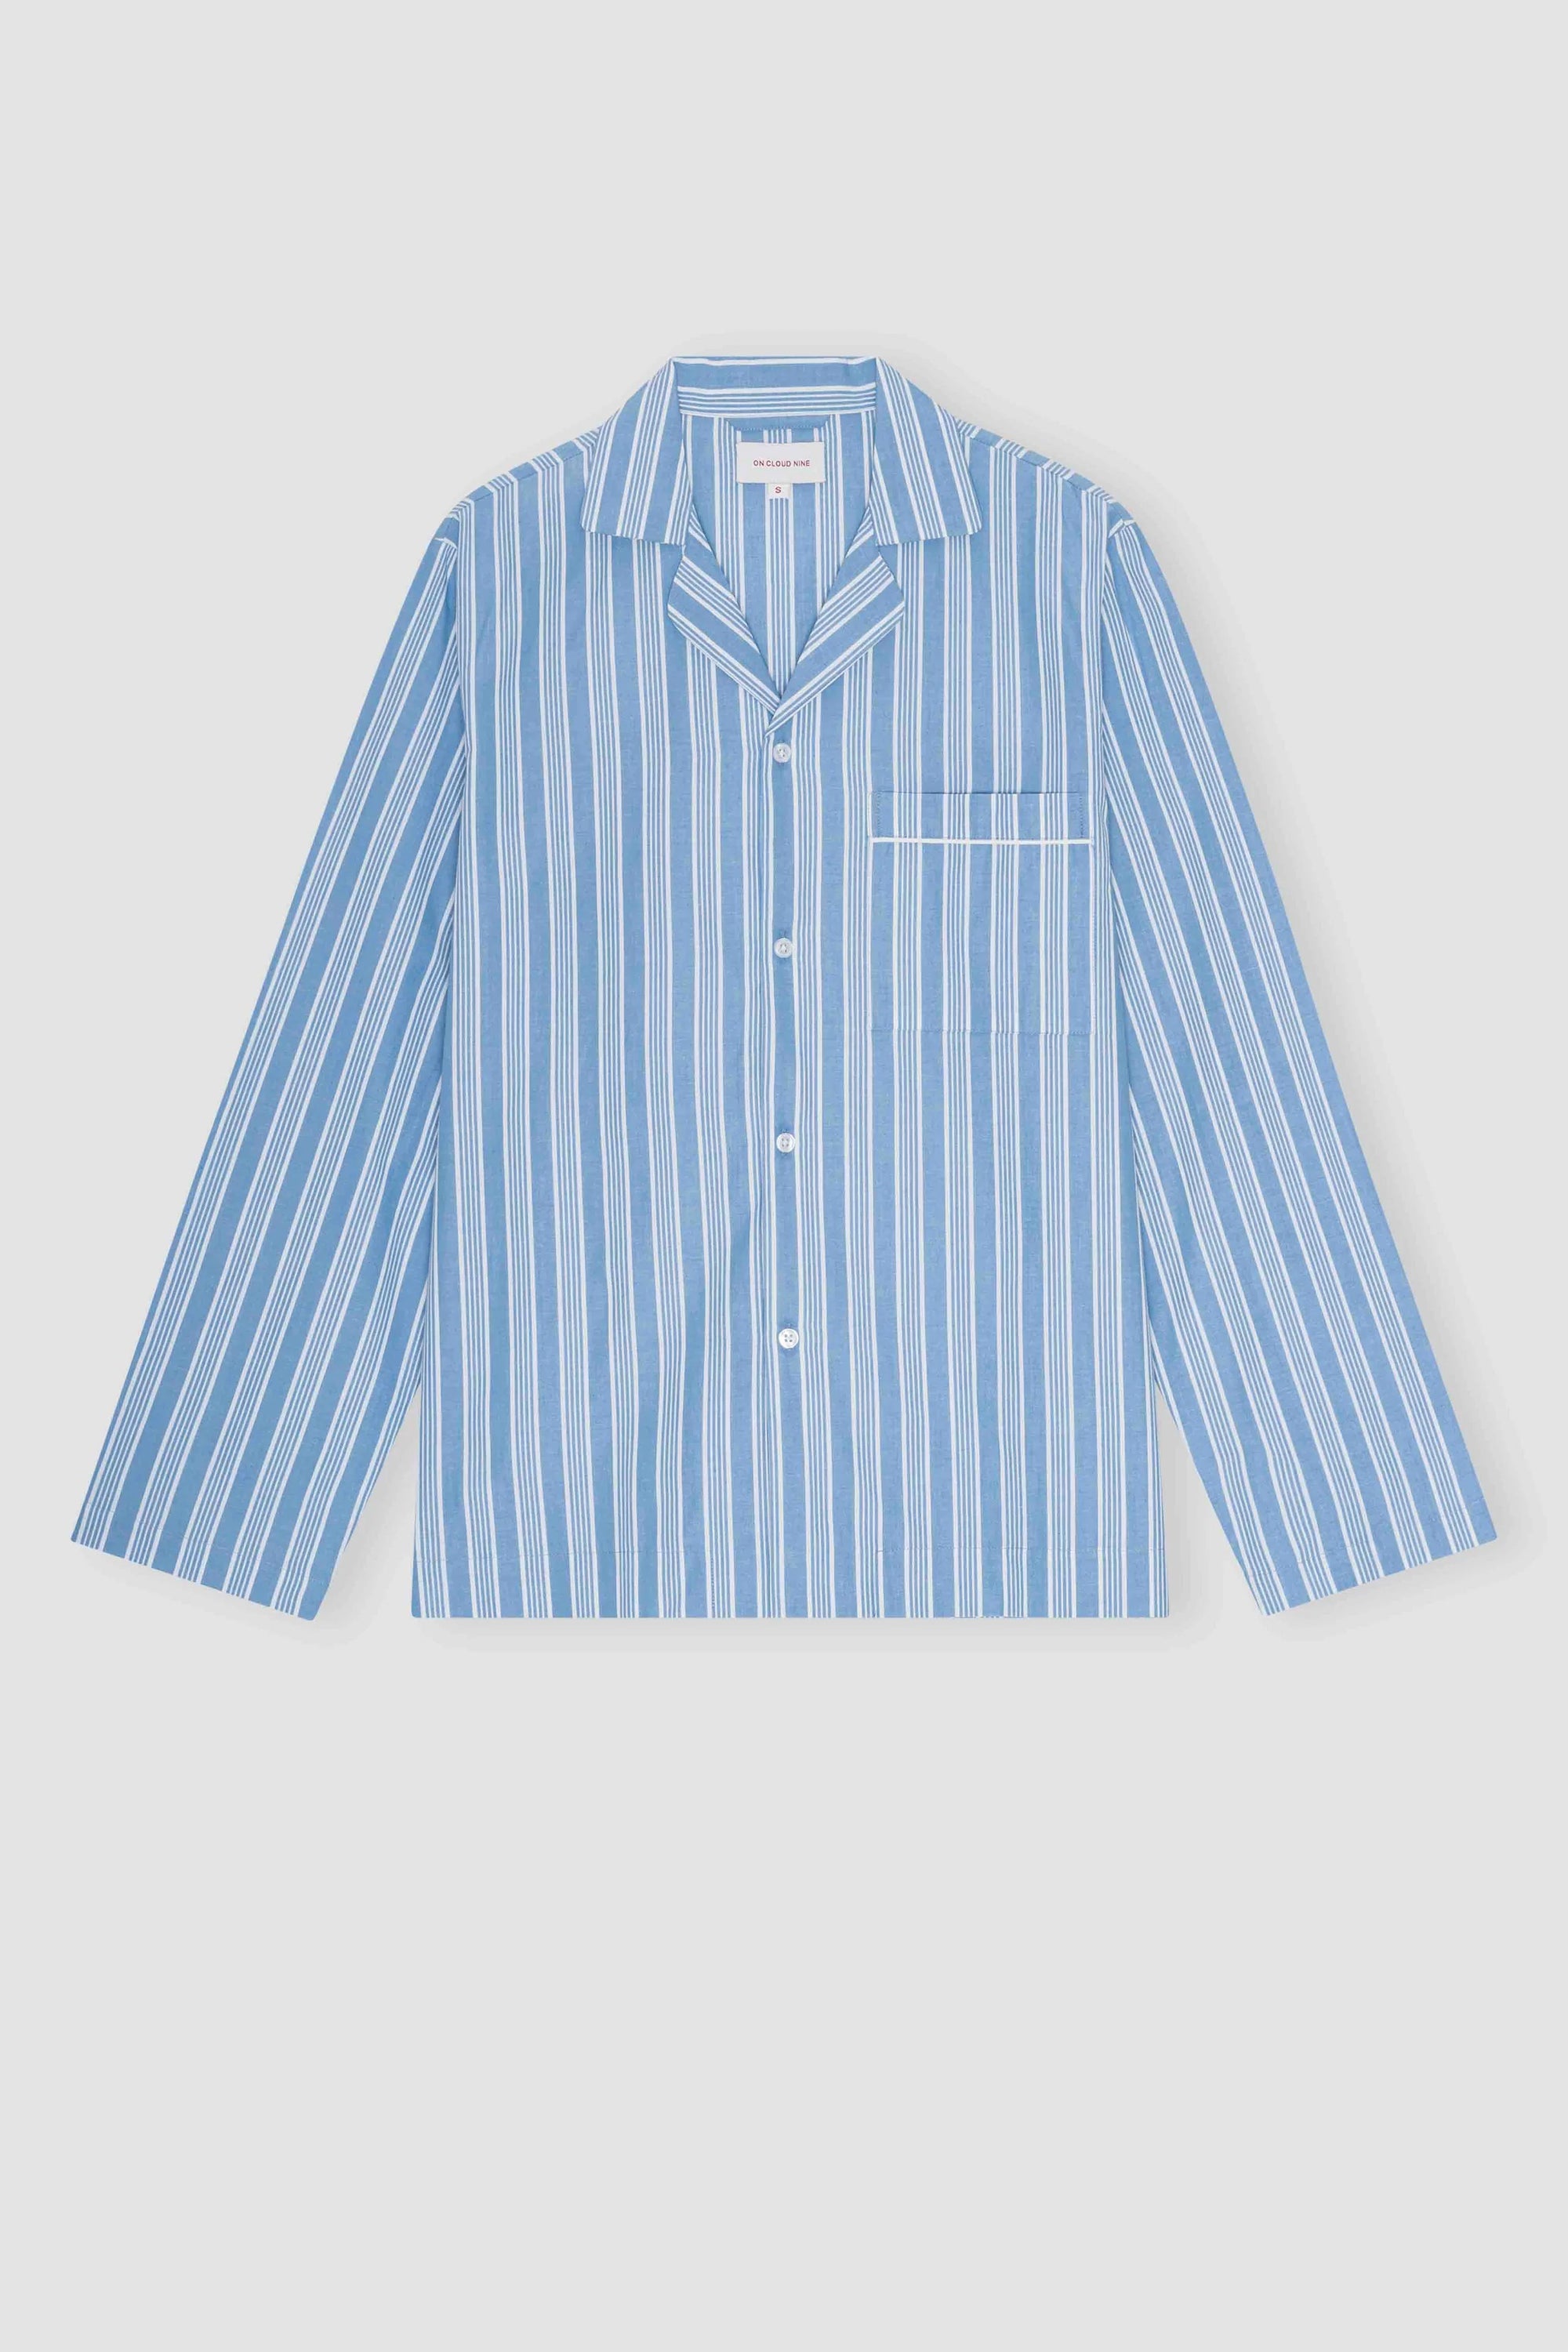 On Cloud Nine French Striped Pajama Set, curated by Shop Sommer in San Francisco.